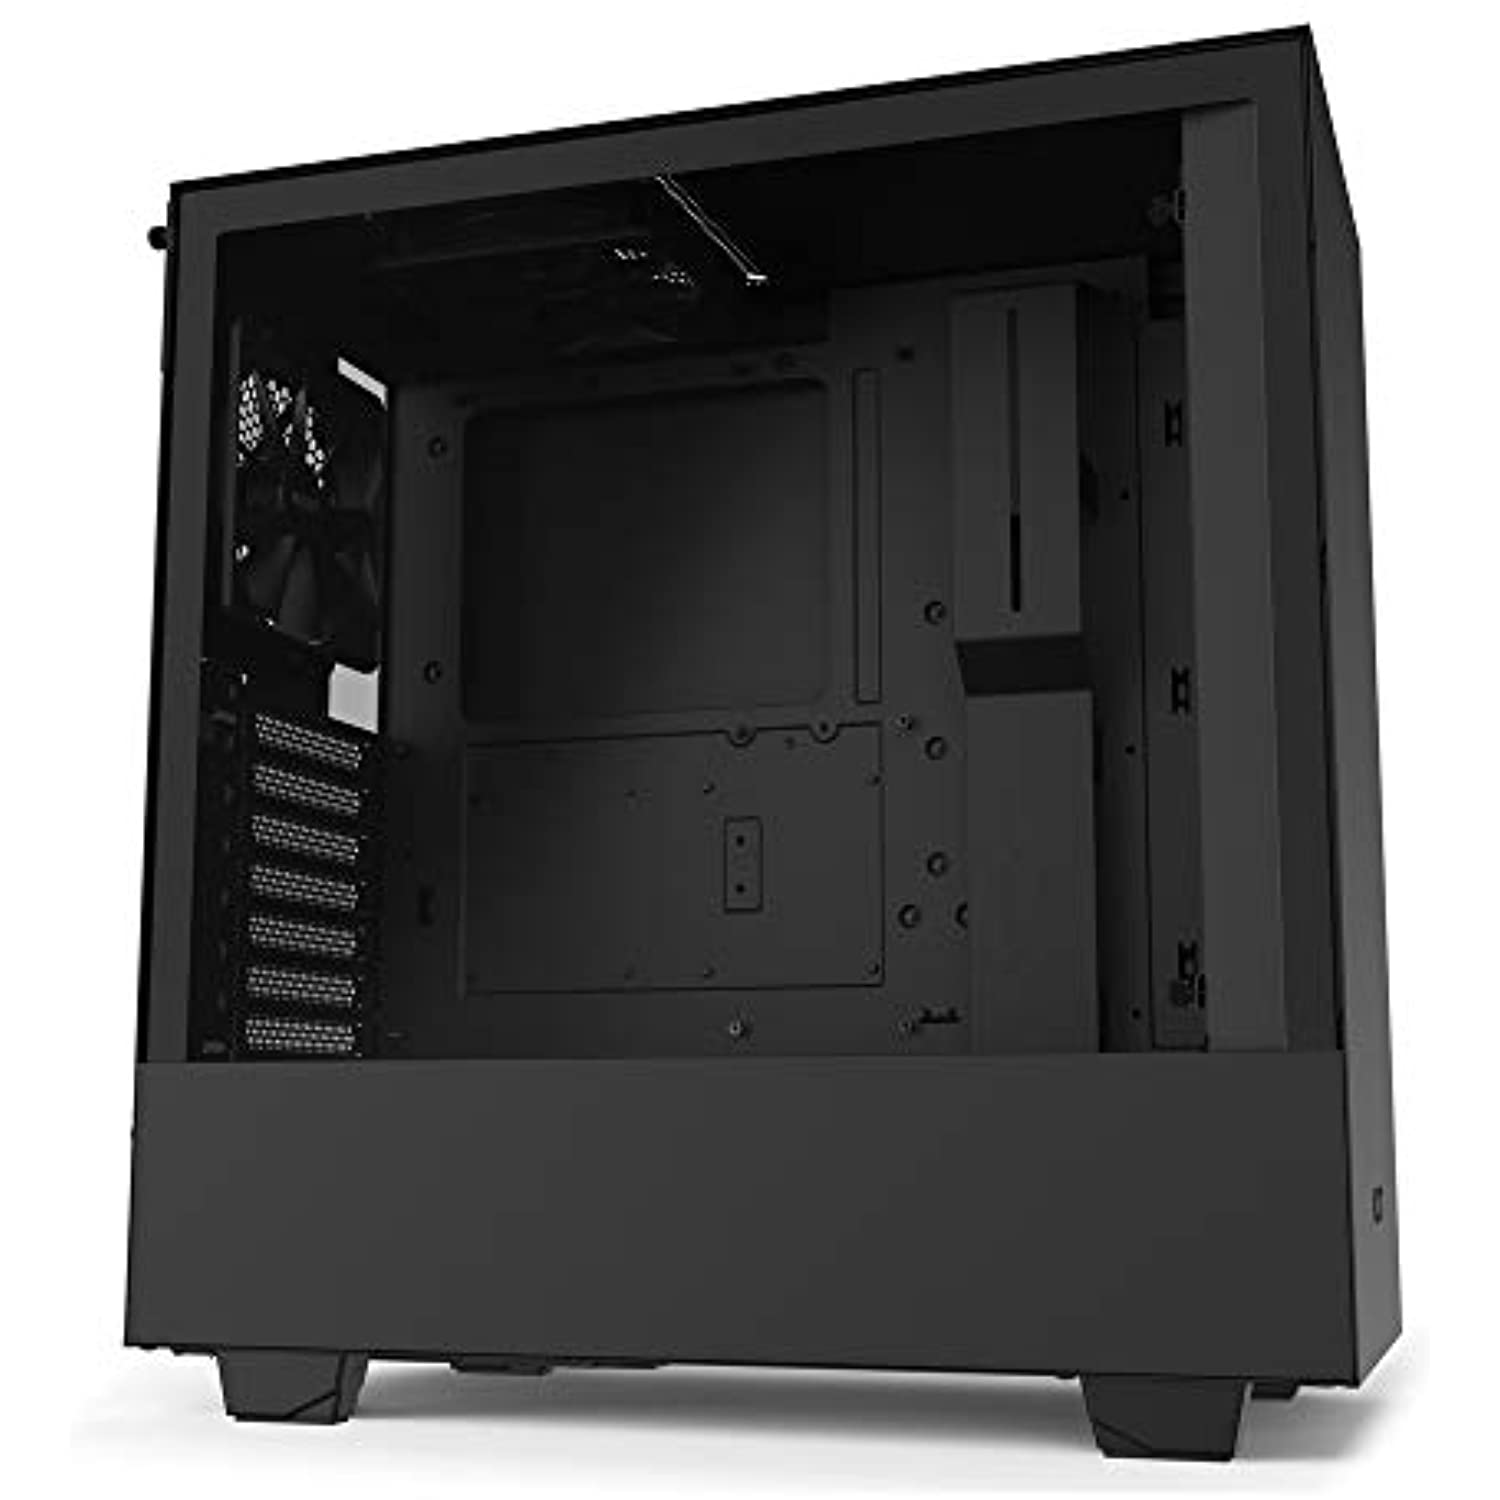 NZXT H510 - CA-H510B-B1 - Compact ATX Mid-Tower PC Gaming Case - Front I/O USB Type-C Port - Tempered Glass Side Panel - Cable Management System - Water-Cooling Ready - Black, Non i-Series